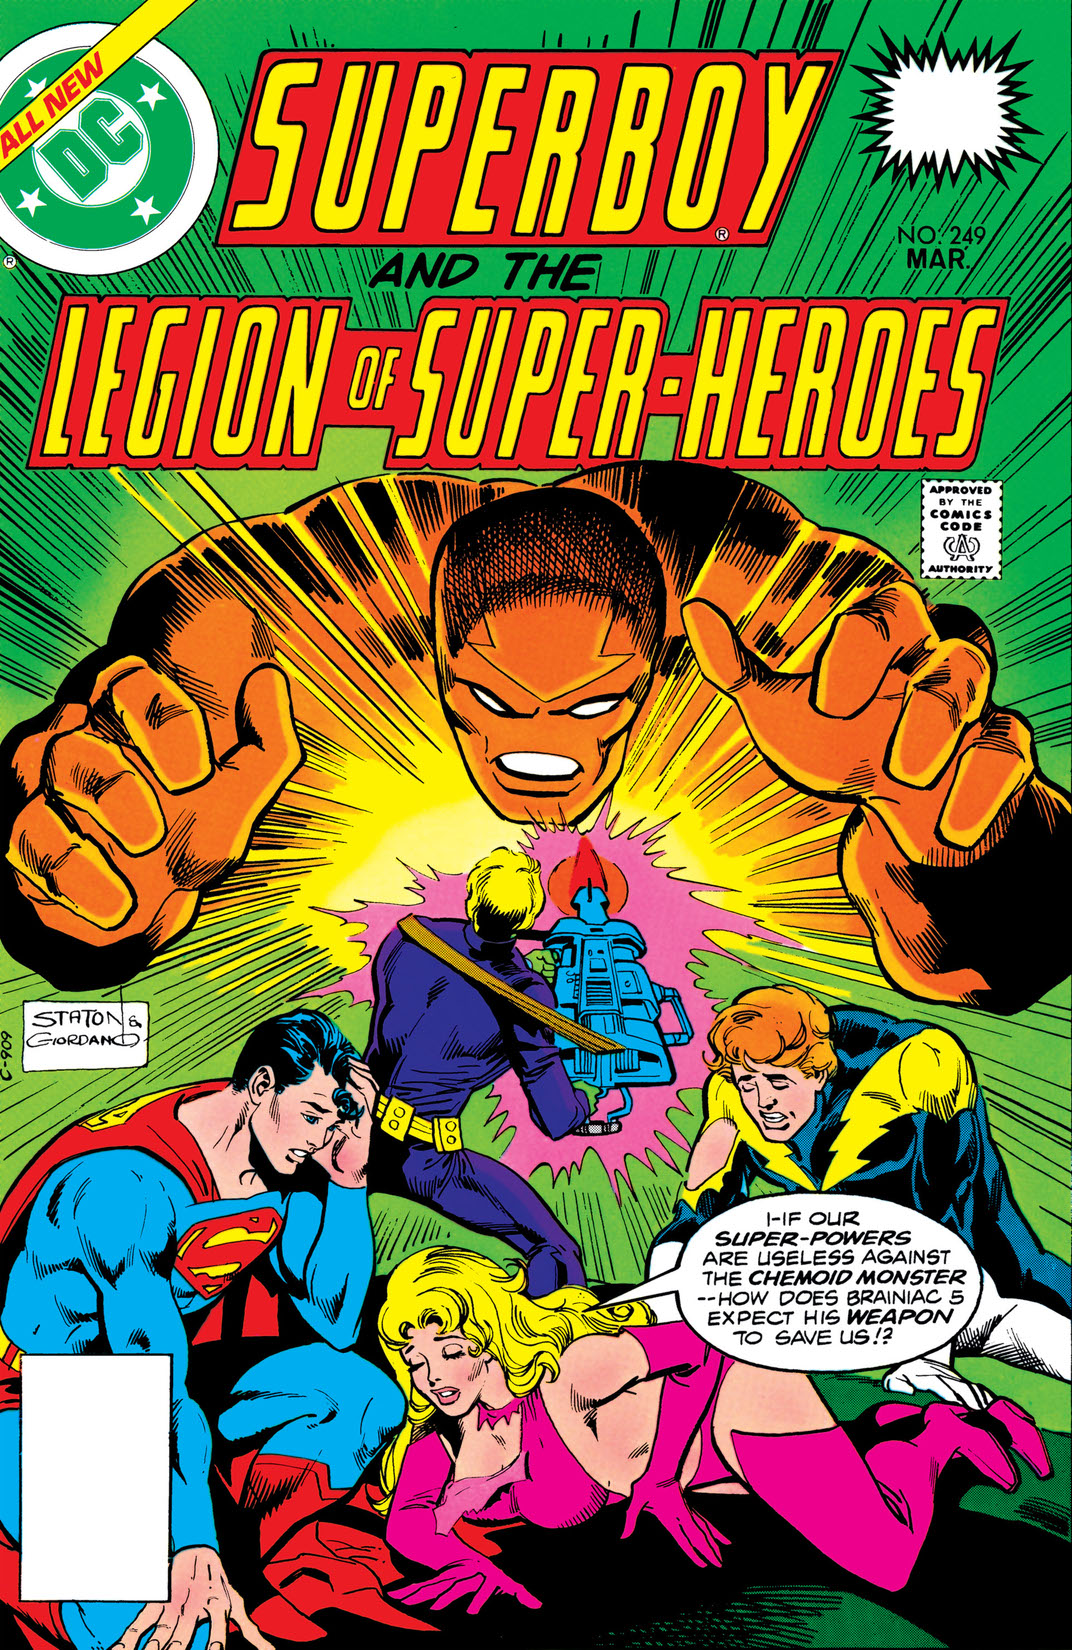 Superboy and the Legion of Super-Heroes (1977-) #249 preview images